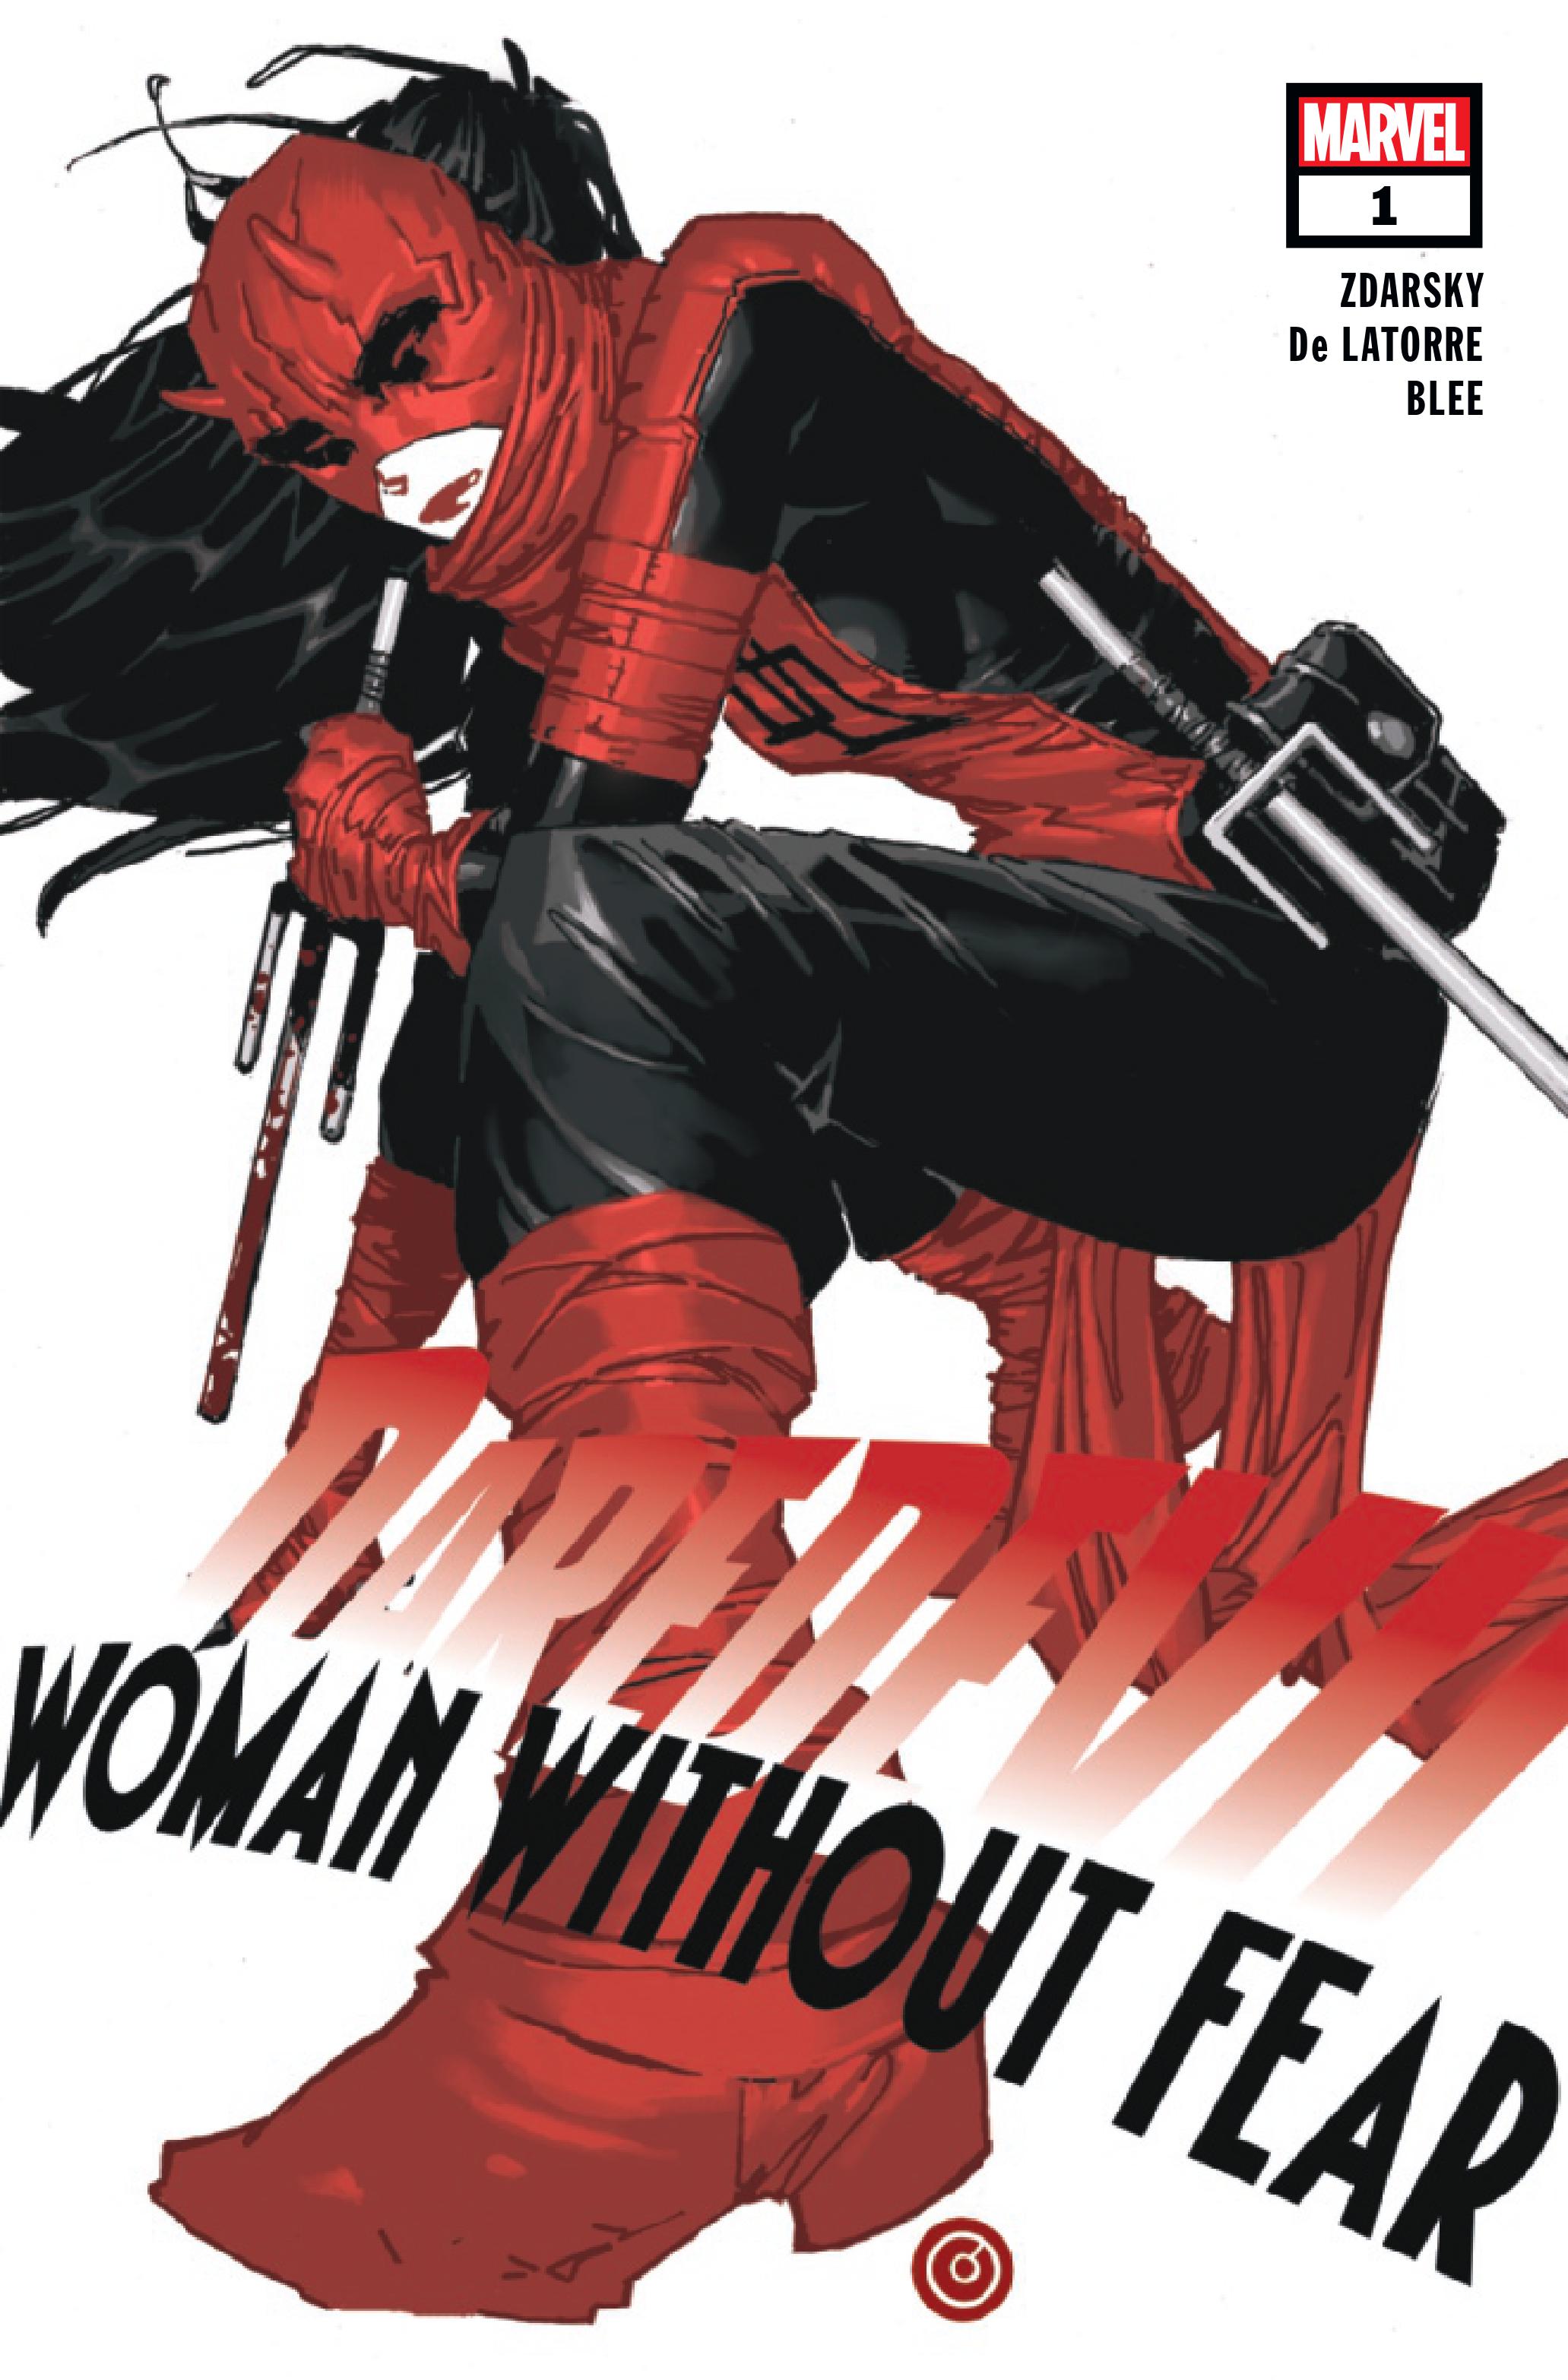 daredevil-woman-without-fear-1-p0